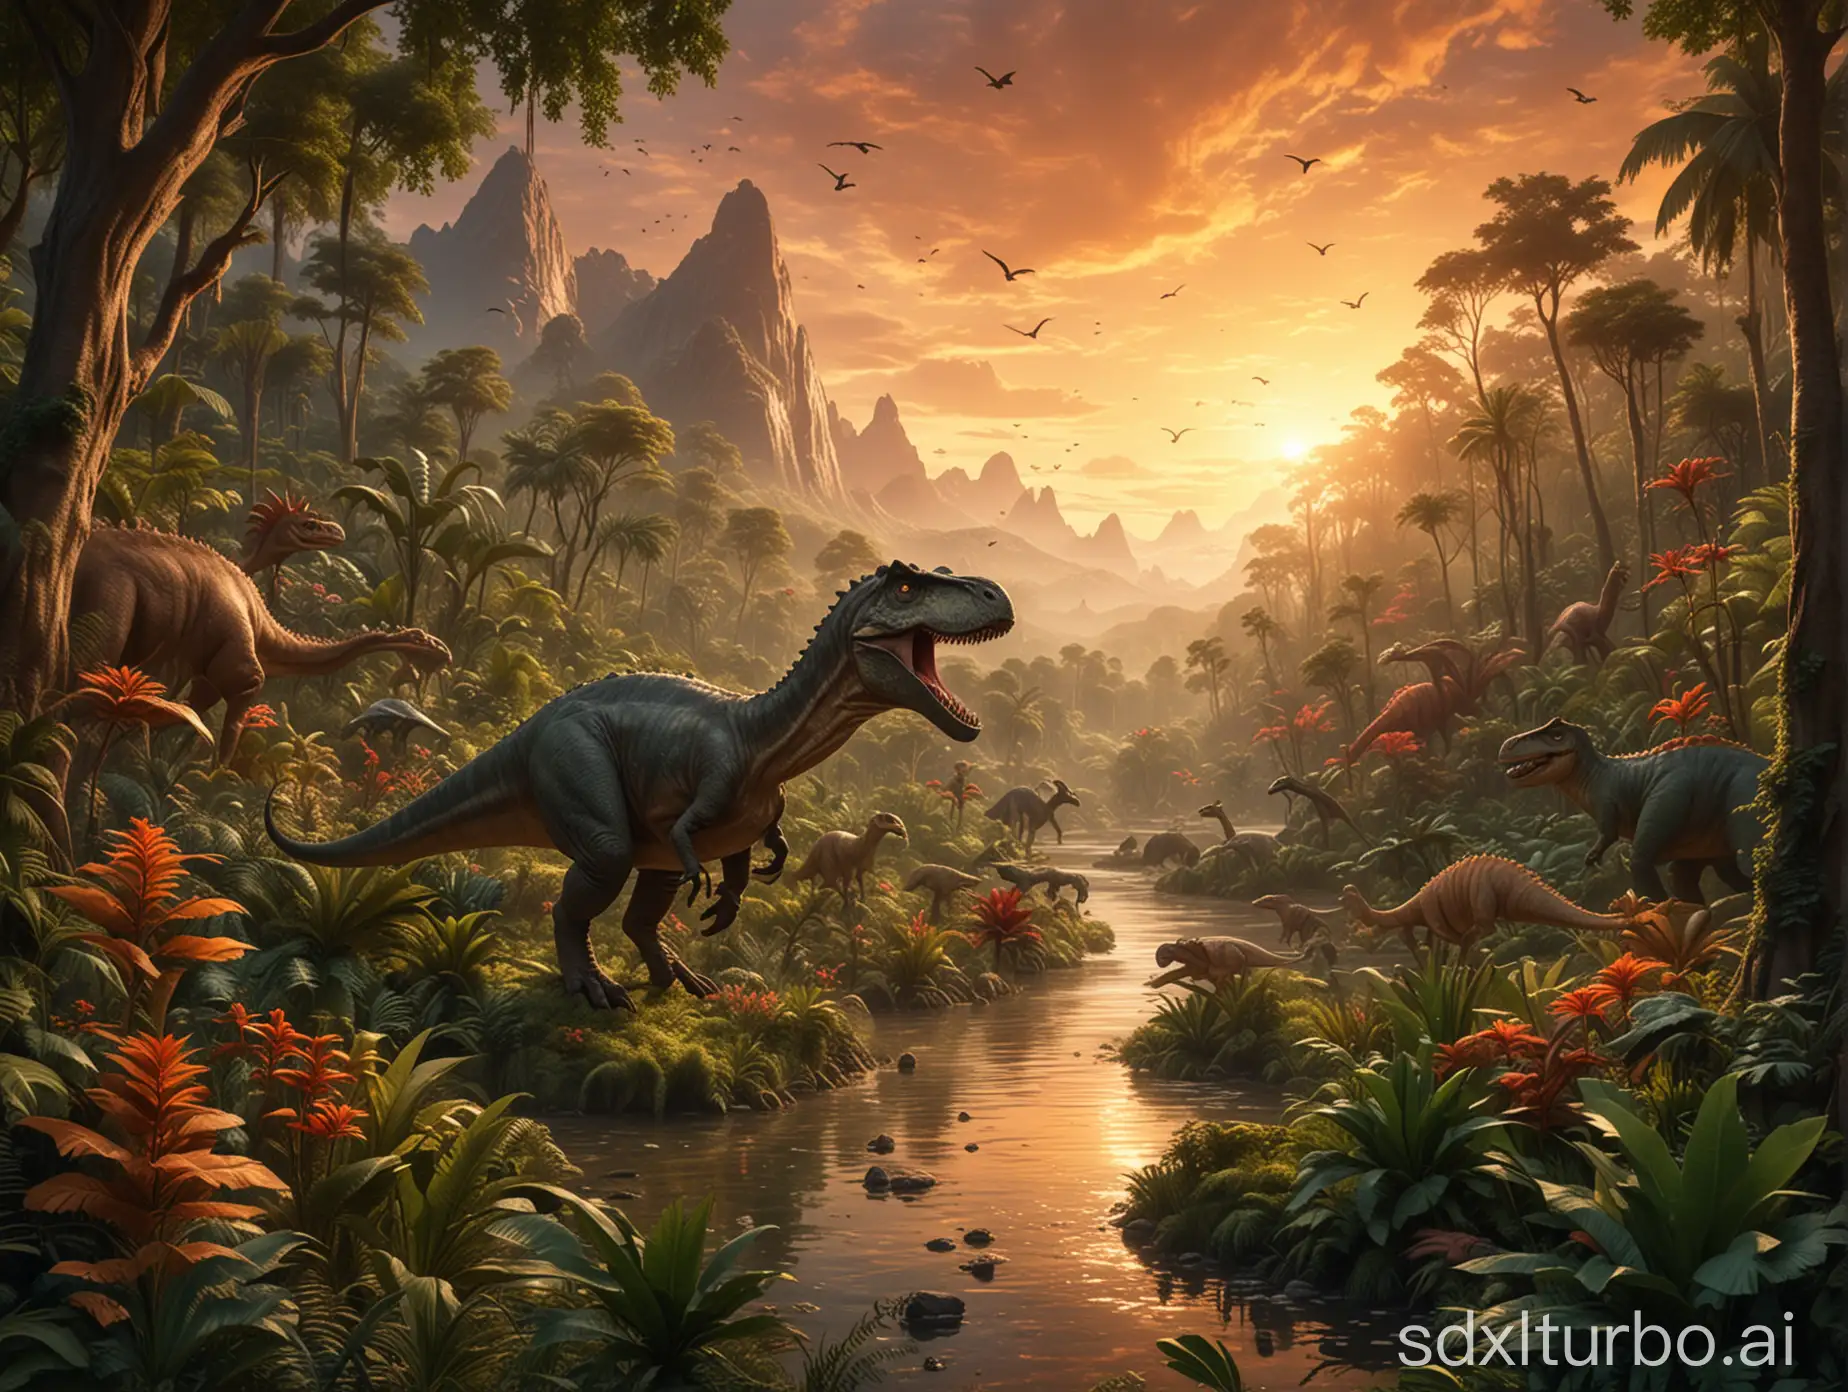 A captivating, cinematic scene of a lush, vibrant forest where dinosaurs, humans, and animals coexist peacefully, with no humans in sight. The dinosaurs display intricate details that showcase their natural splendor, and the background features a breathtaking sunset with a golden sky radiating warmth and serenity. The foreground is filled with lush greenery, a winding river, and a diverse range of flora and fauna. The composition exudes harmony, magic, and awe, providing a visually stunning and immersive experience. This masterpiece skillfully blends illustration, photography, and 3D rendering, featuring a poster-like design and a 16:9 aspect ratio, resulting in a visually engaging and dynamic display., cinematic, 3d render, typography, photo, illustration, poster
